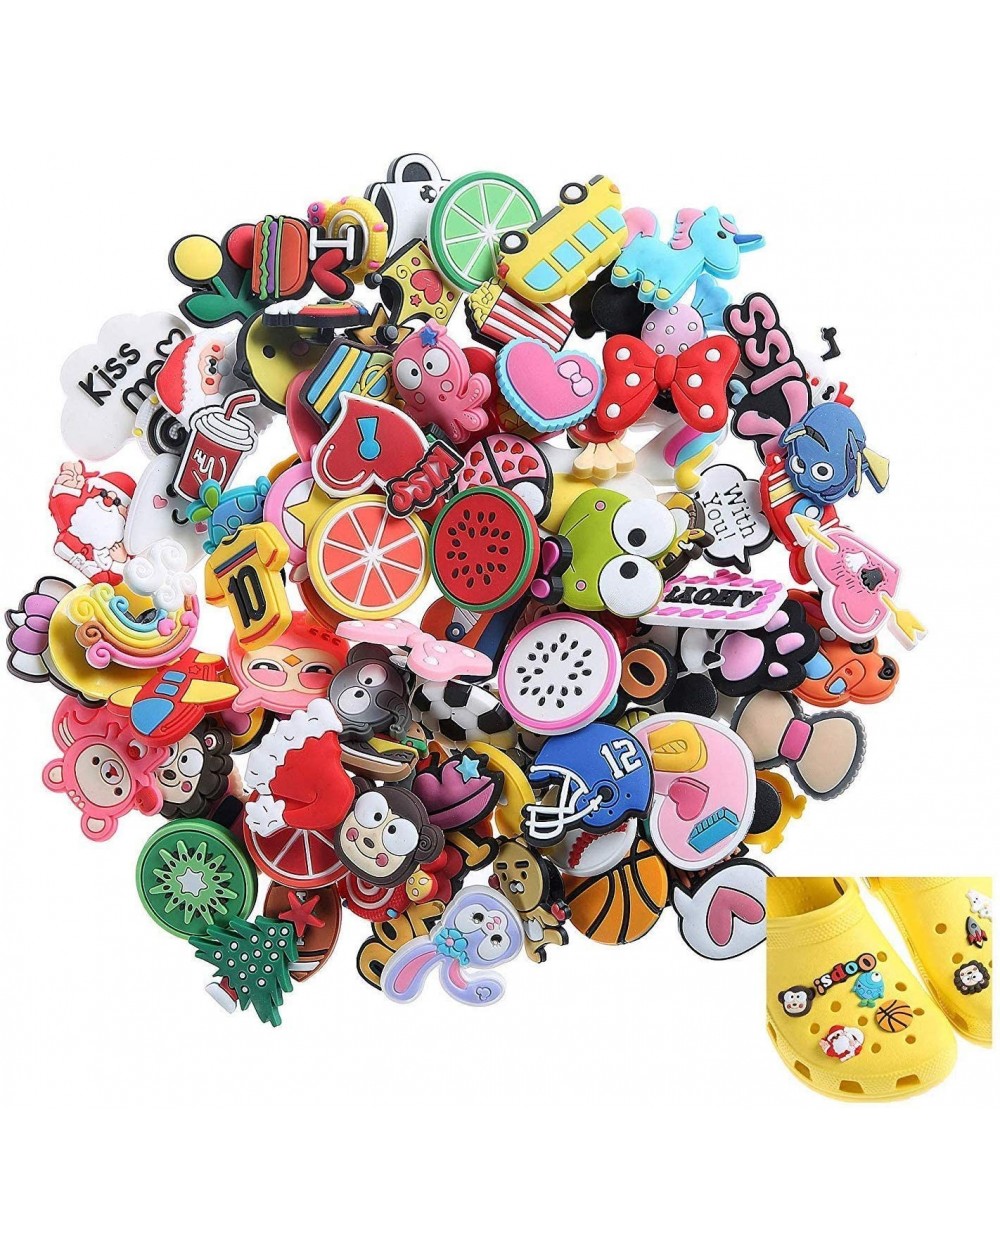 Party Favors 150pcs Different Shape Shoes Charms Fits for Clog Shoes & Wristband Bracelet Party Gifts - CT193MSLNOZ $15.61